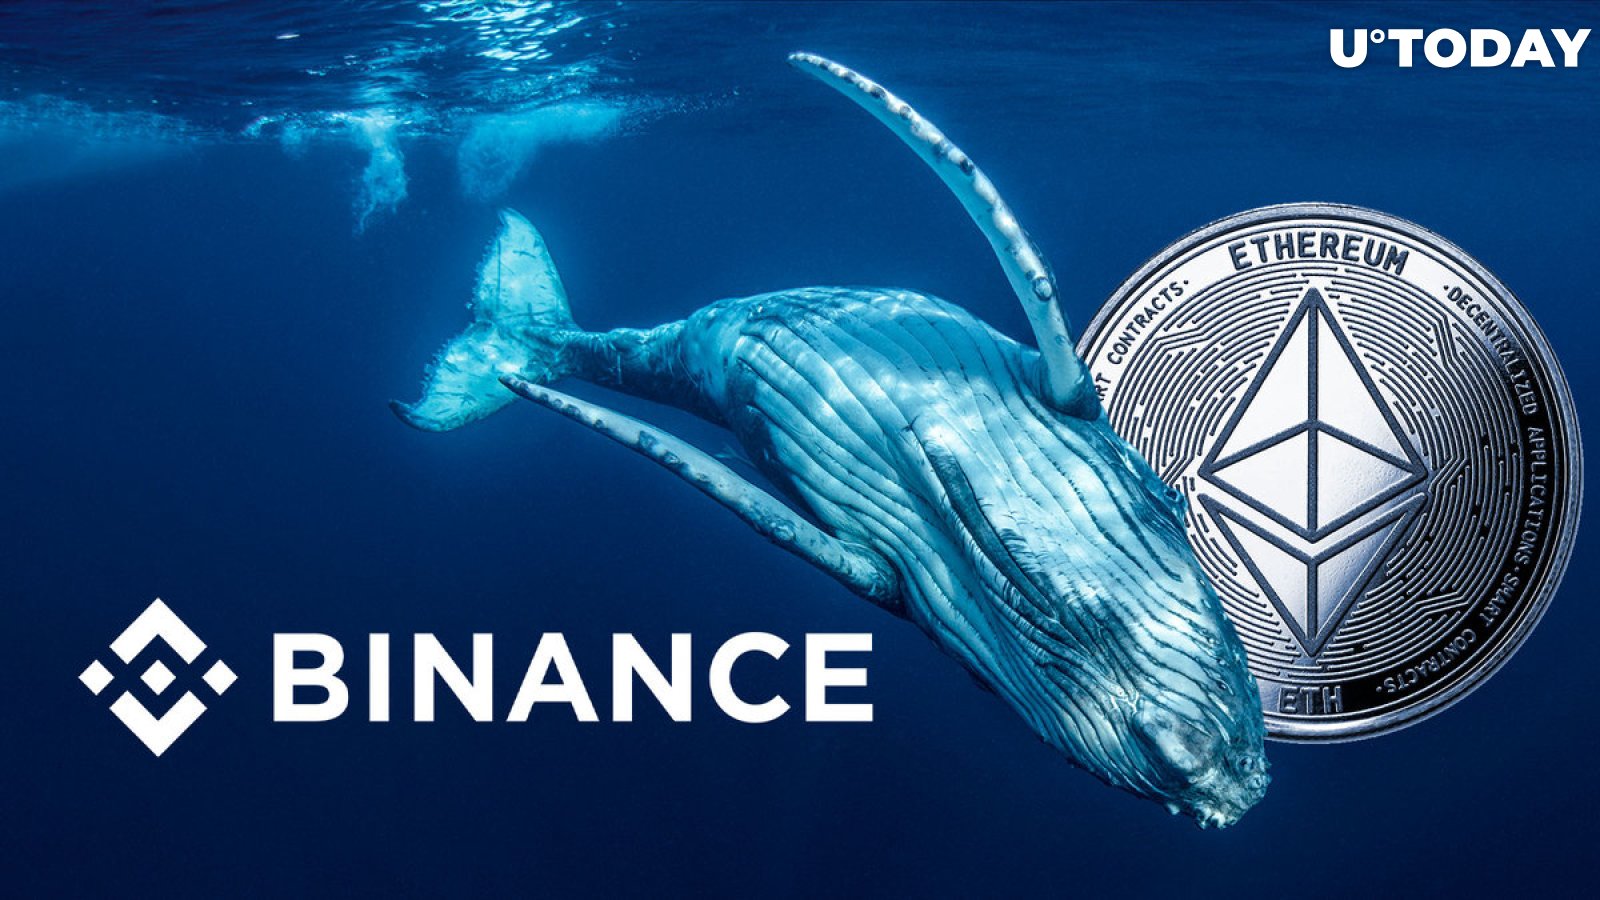 Dormant Ethereum Whale Sells Millions in ETH on Binance With Massive Profit: Details